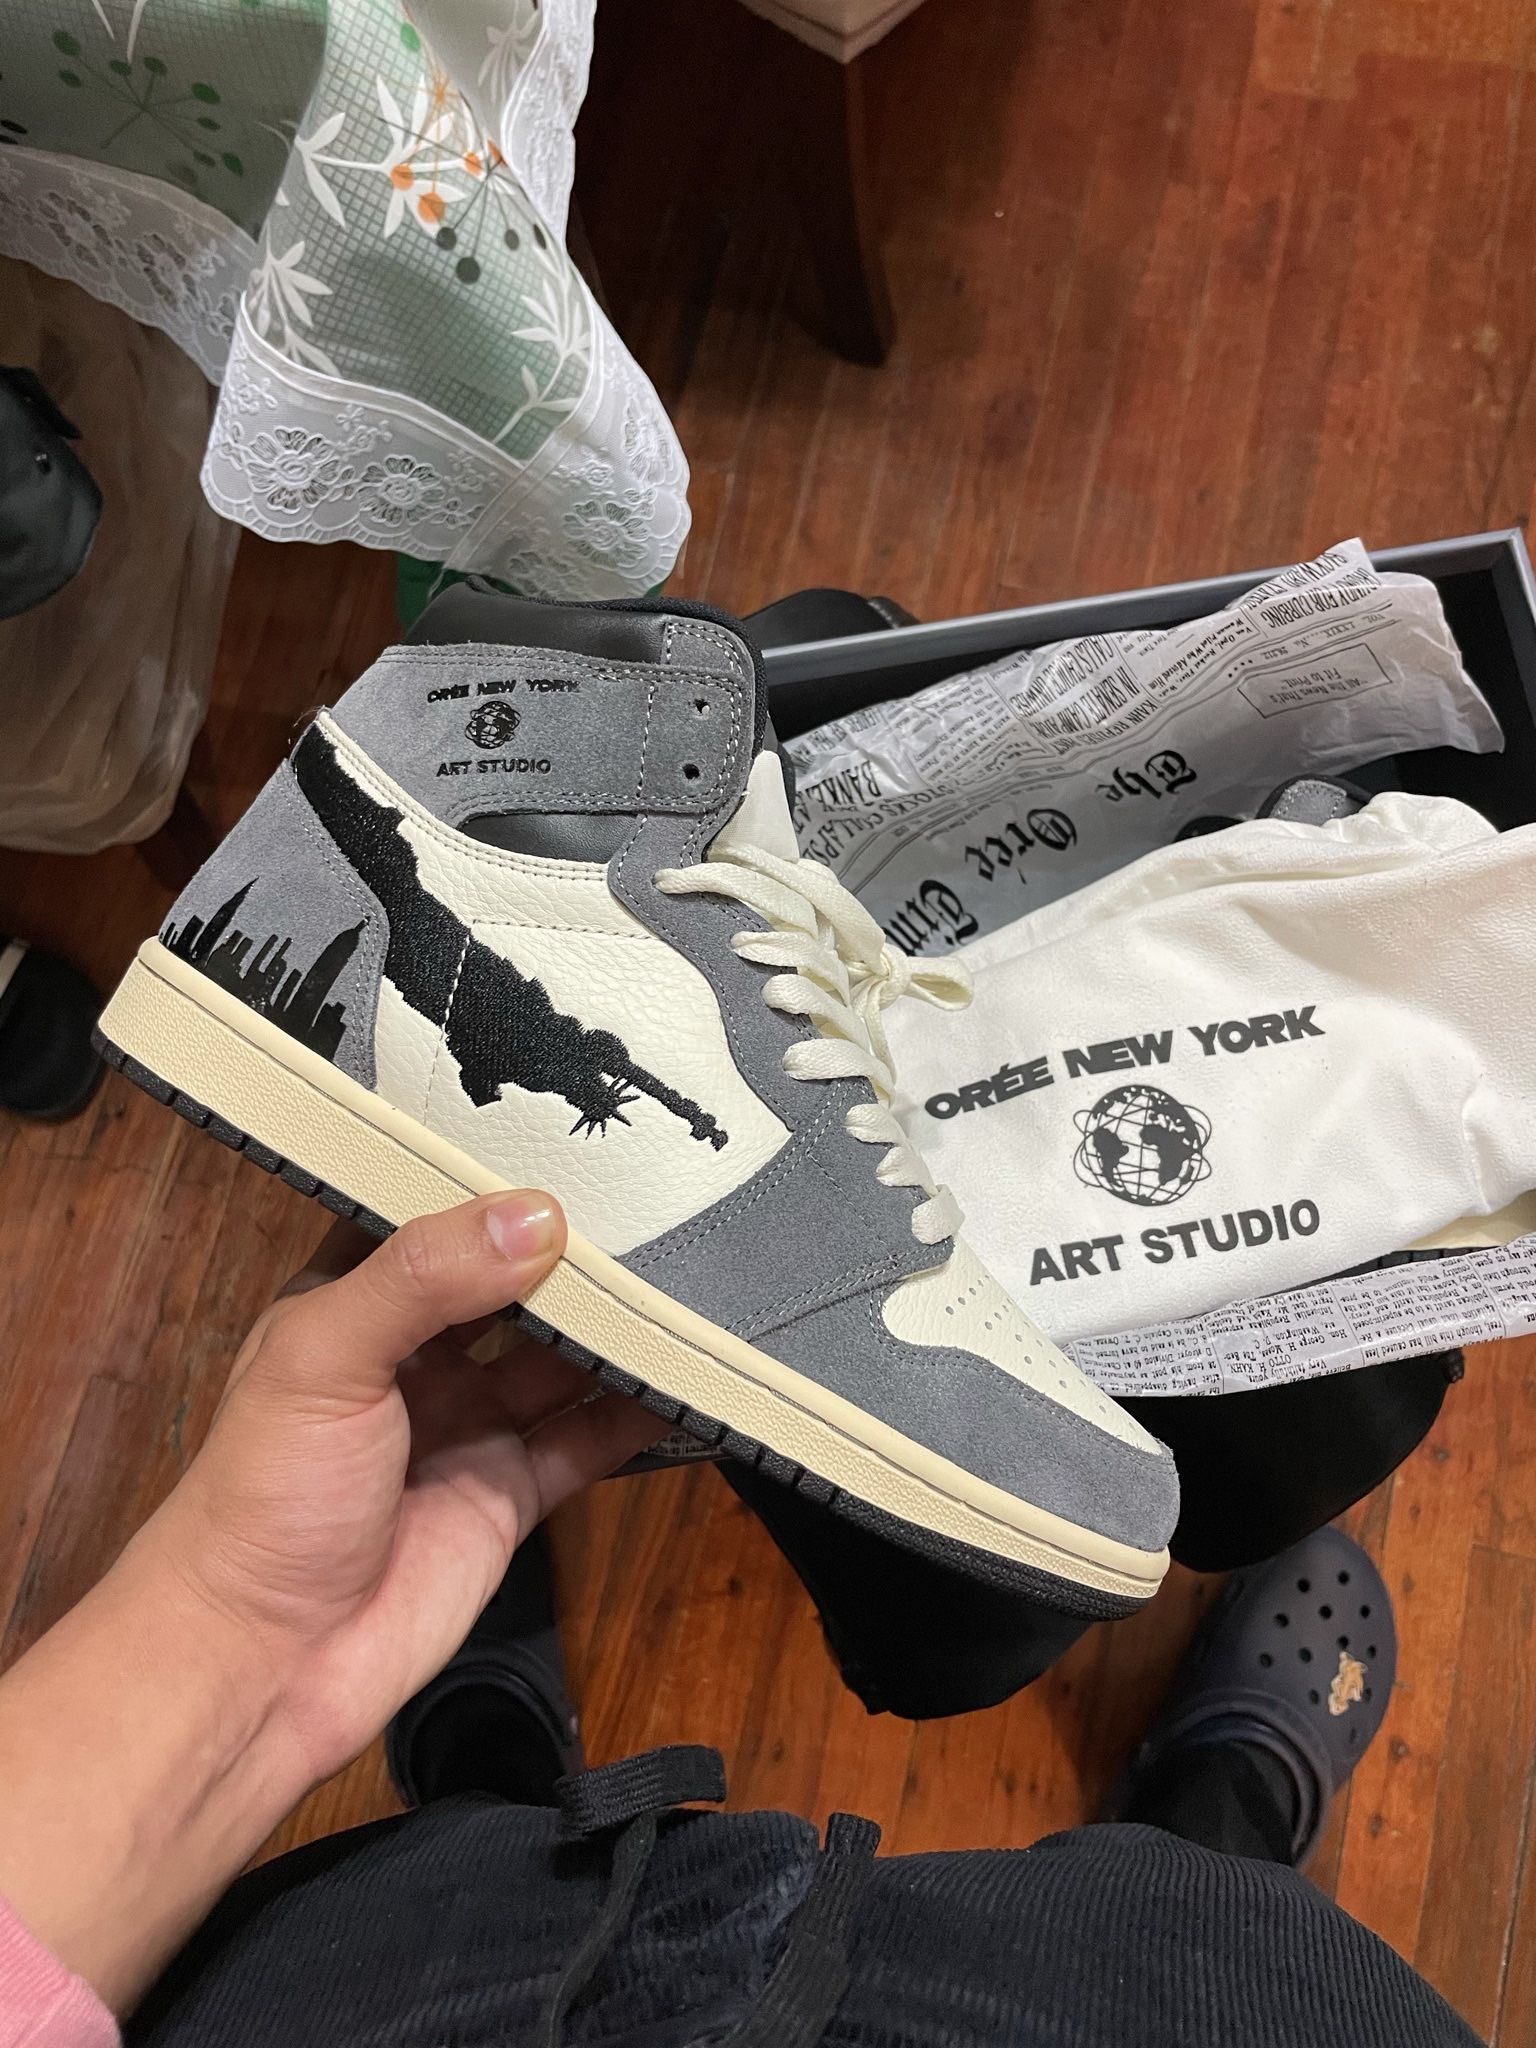 Oree New York Empire City High V2 for Sale in Queens, NY - OfferUp